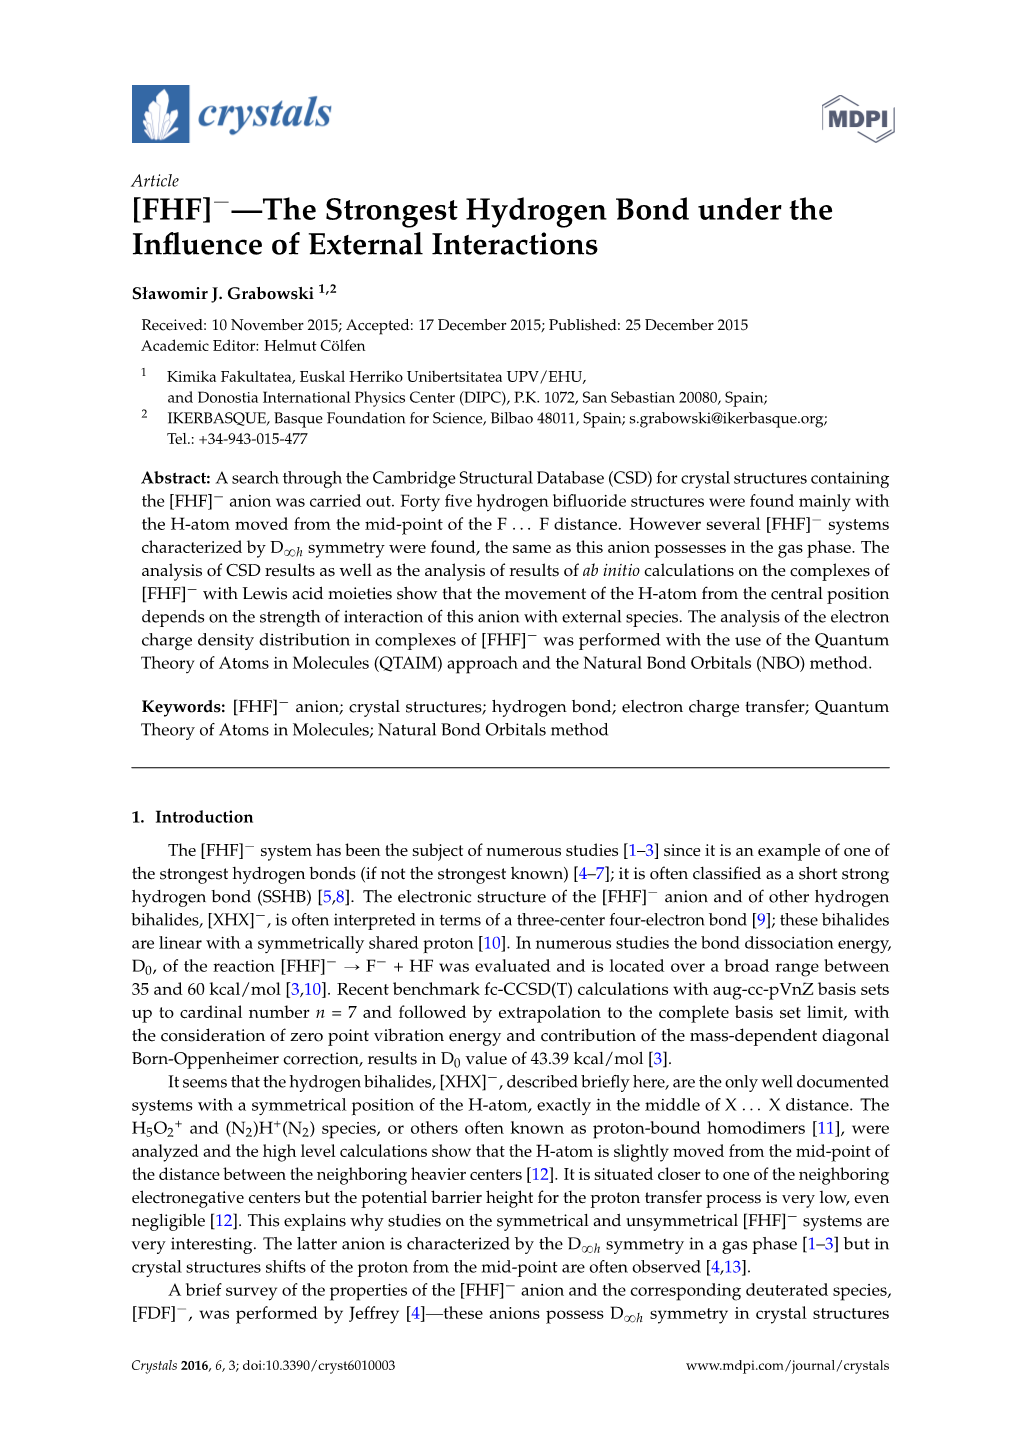 [FHF]-—The Strongest Hydrogen Bond Under the Influence of External Interactions